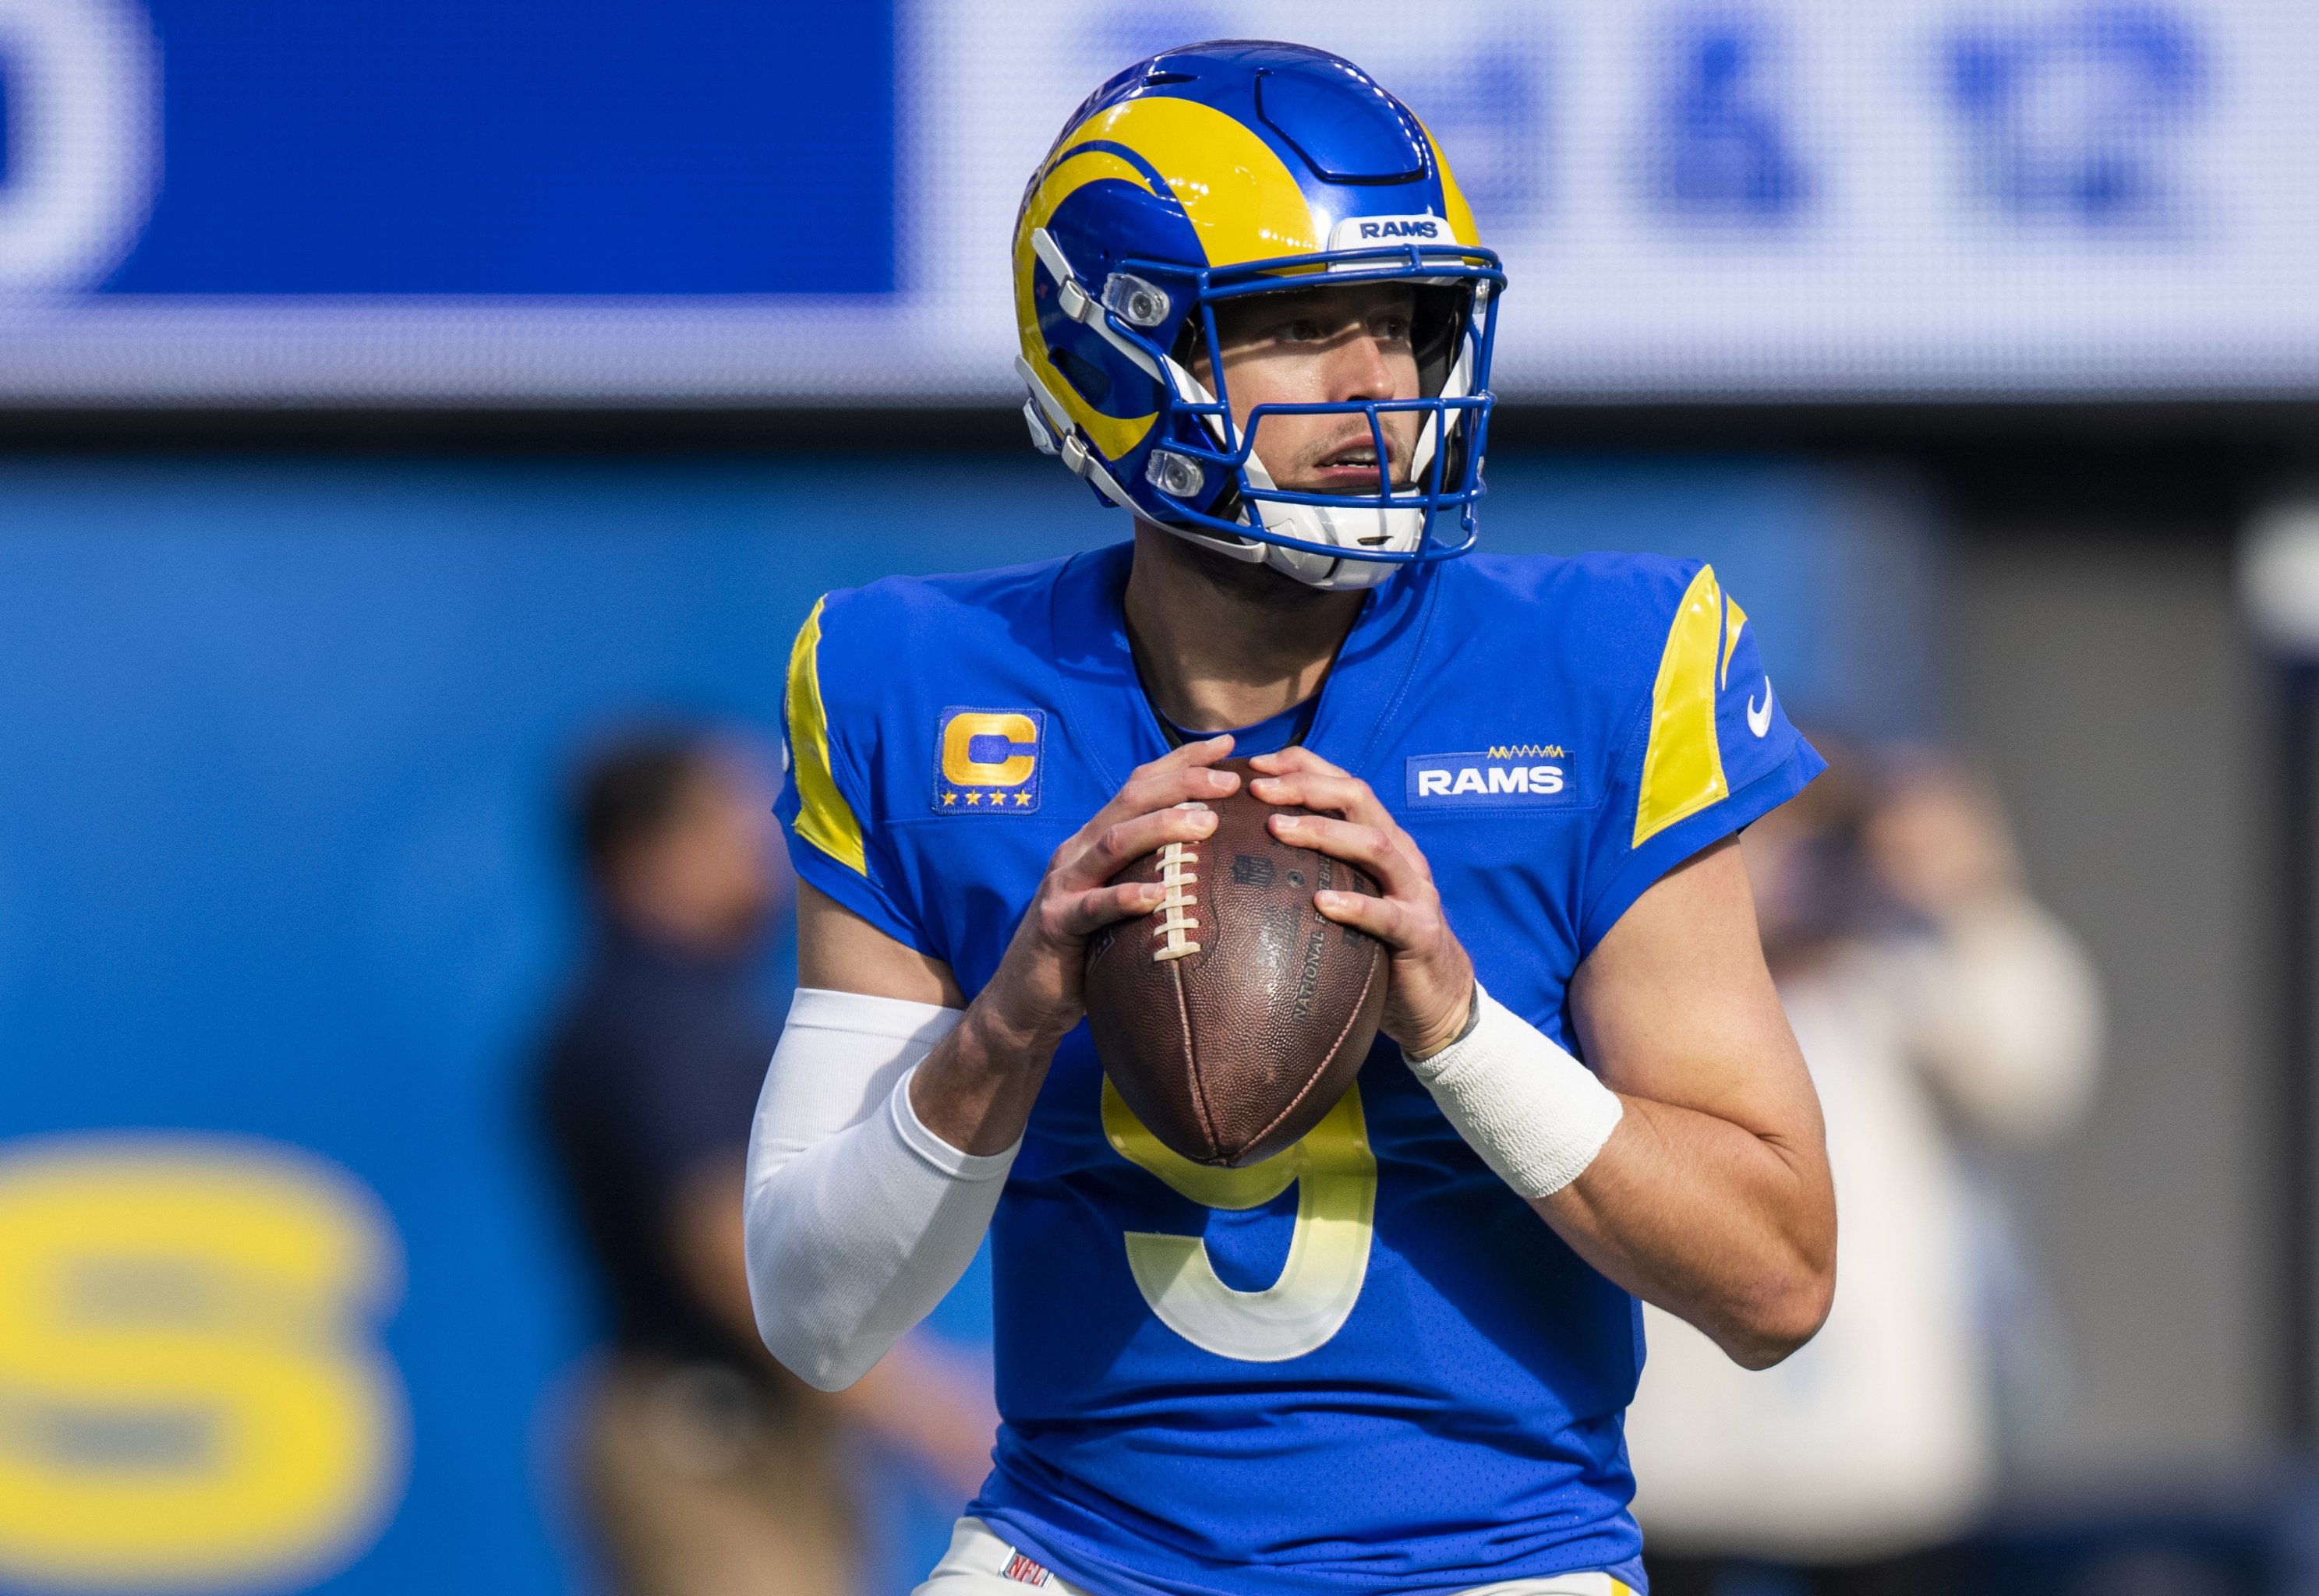 Rams 2022 schedule: Game-by-game breakdown and predictions